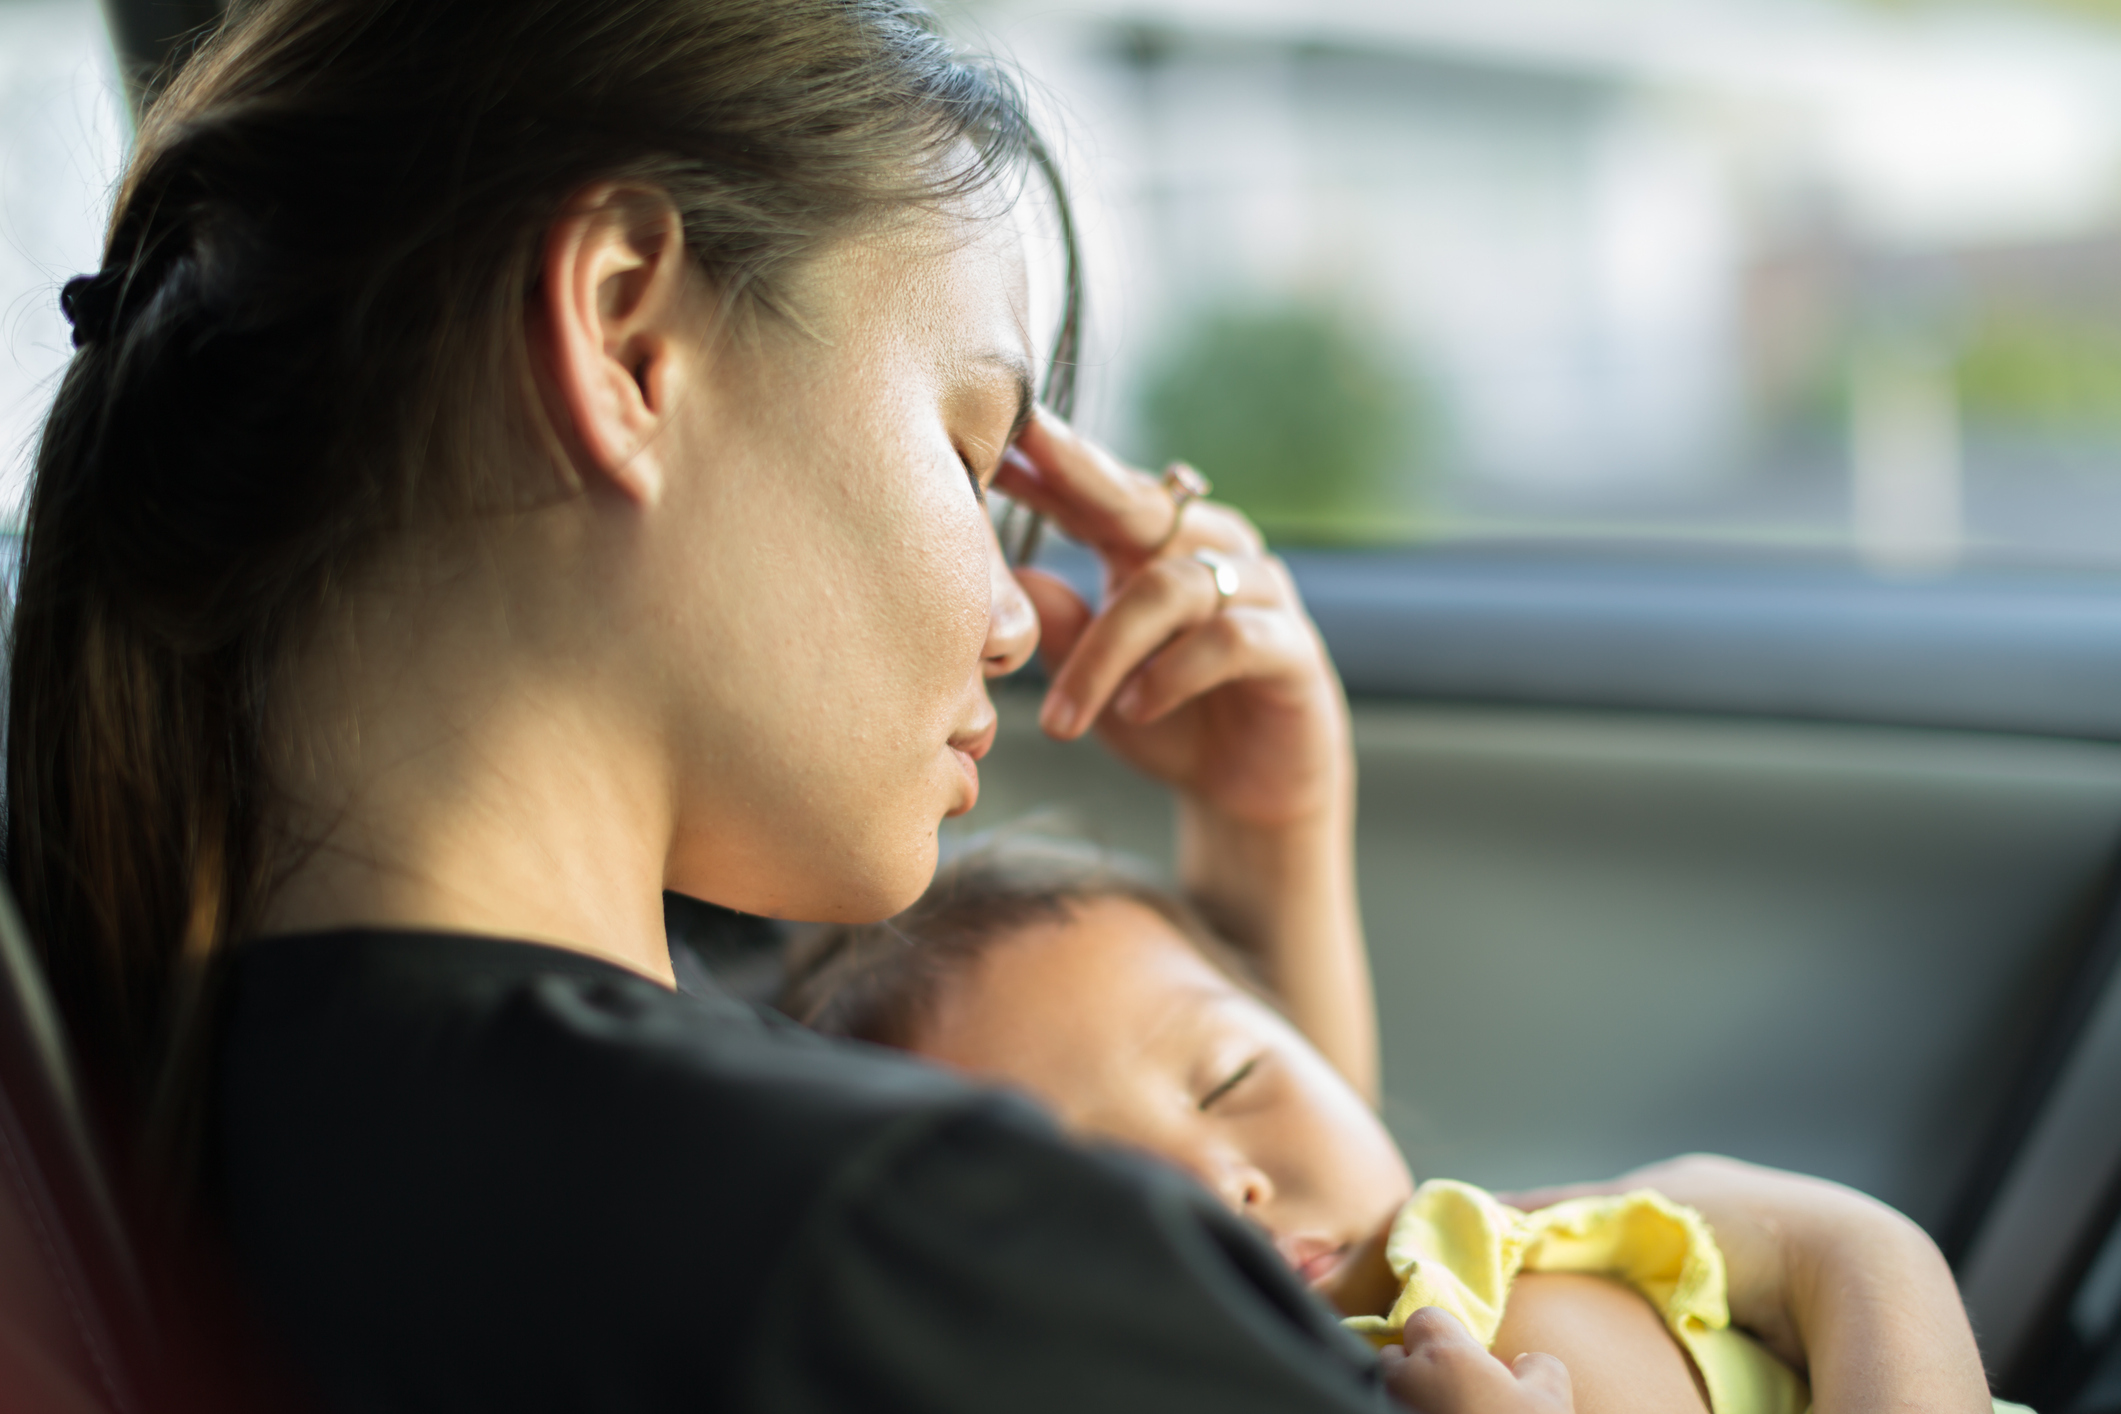 Postpartum depression may last for years